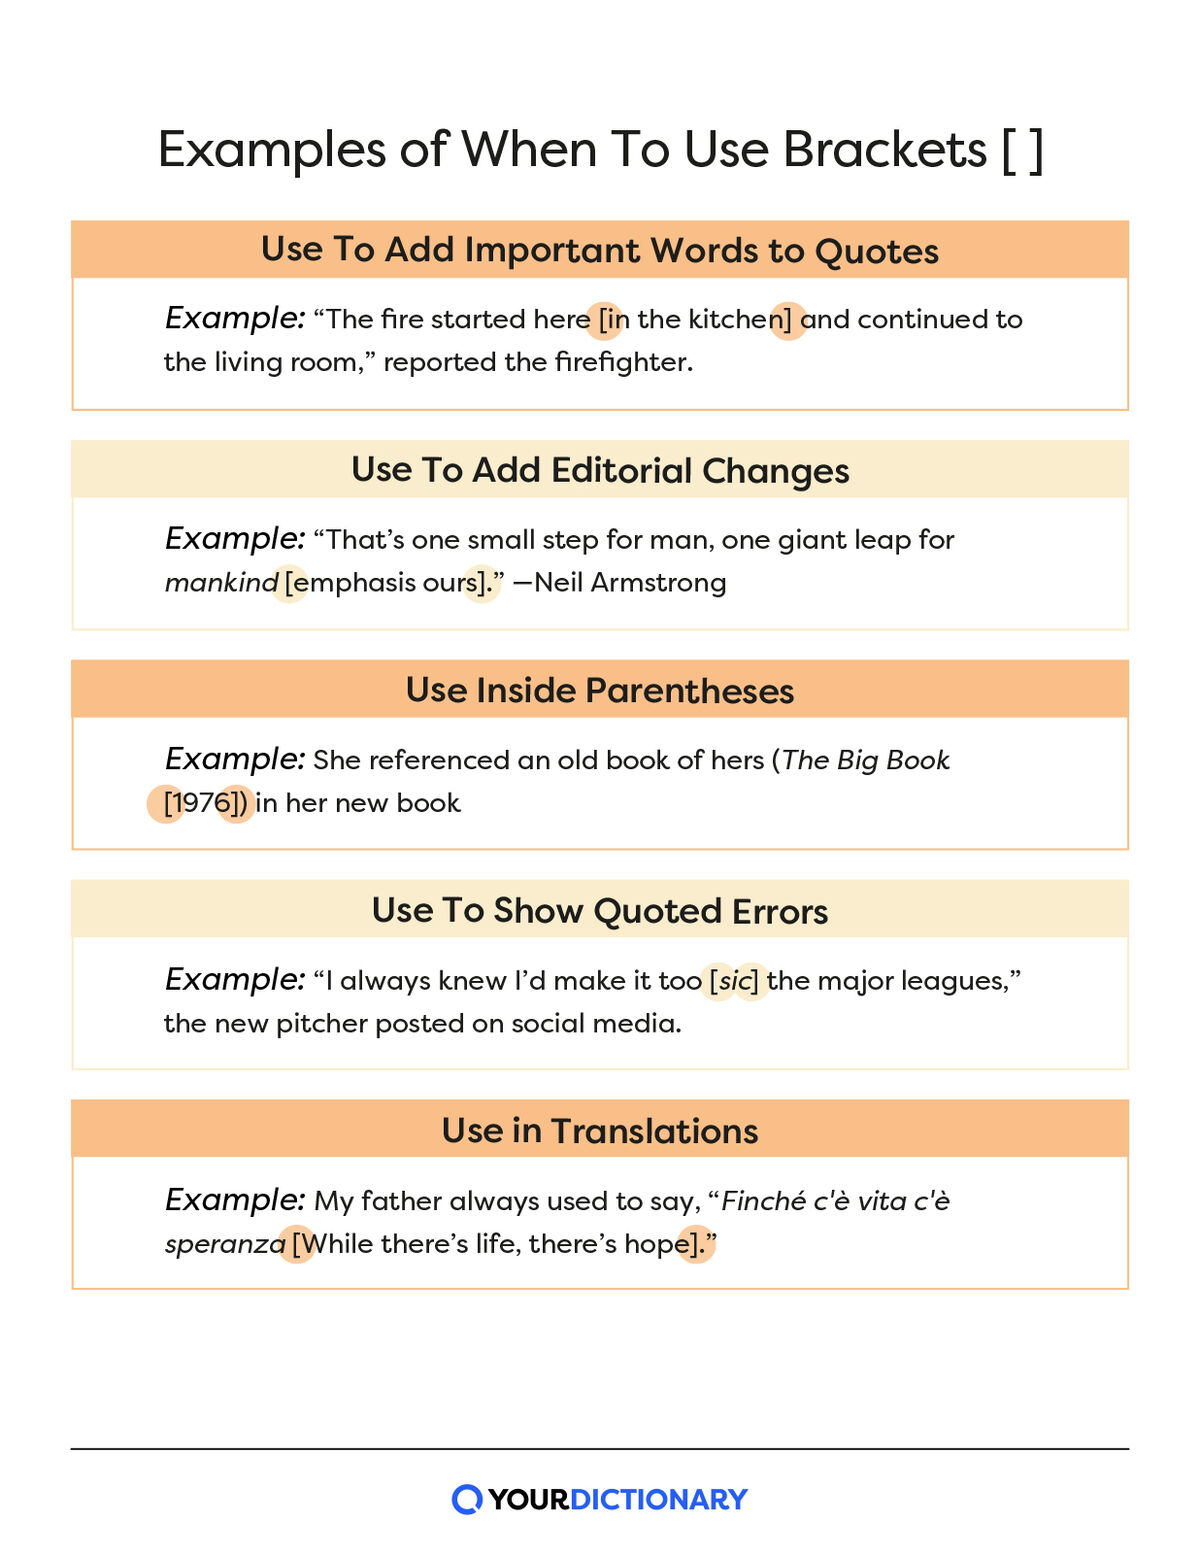 chart of the five rules for when to use brackets with example sentences from the article